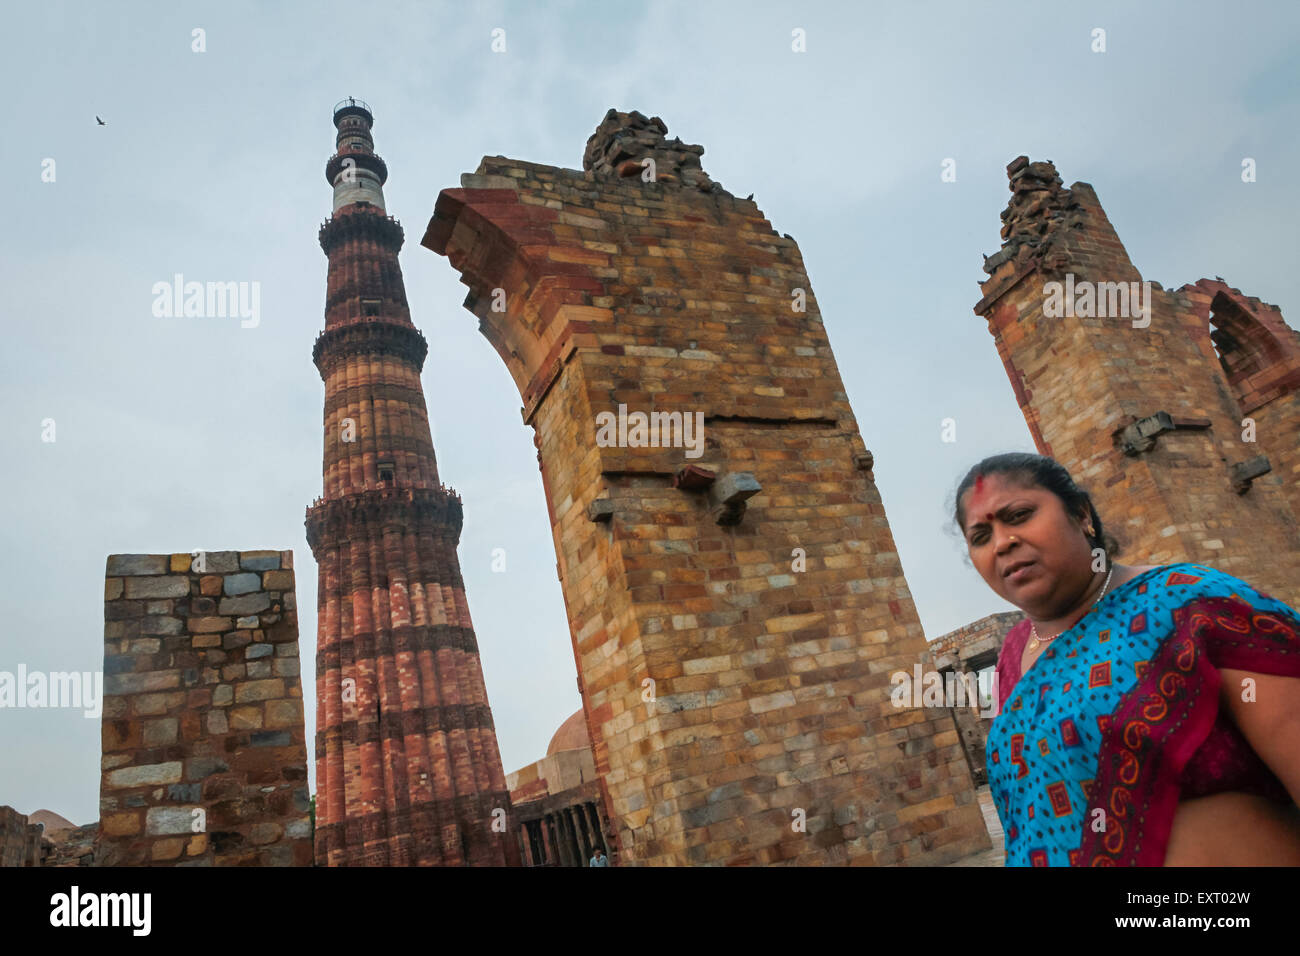 A woman visitor is photographed in a background of Qutab Minar in Mehrauli, South Delhi, Delhi, India. Stock Photo